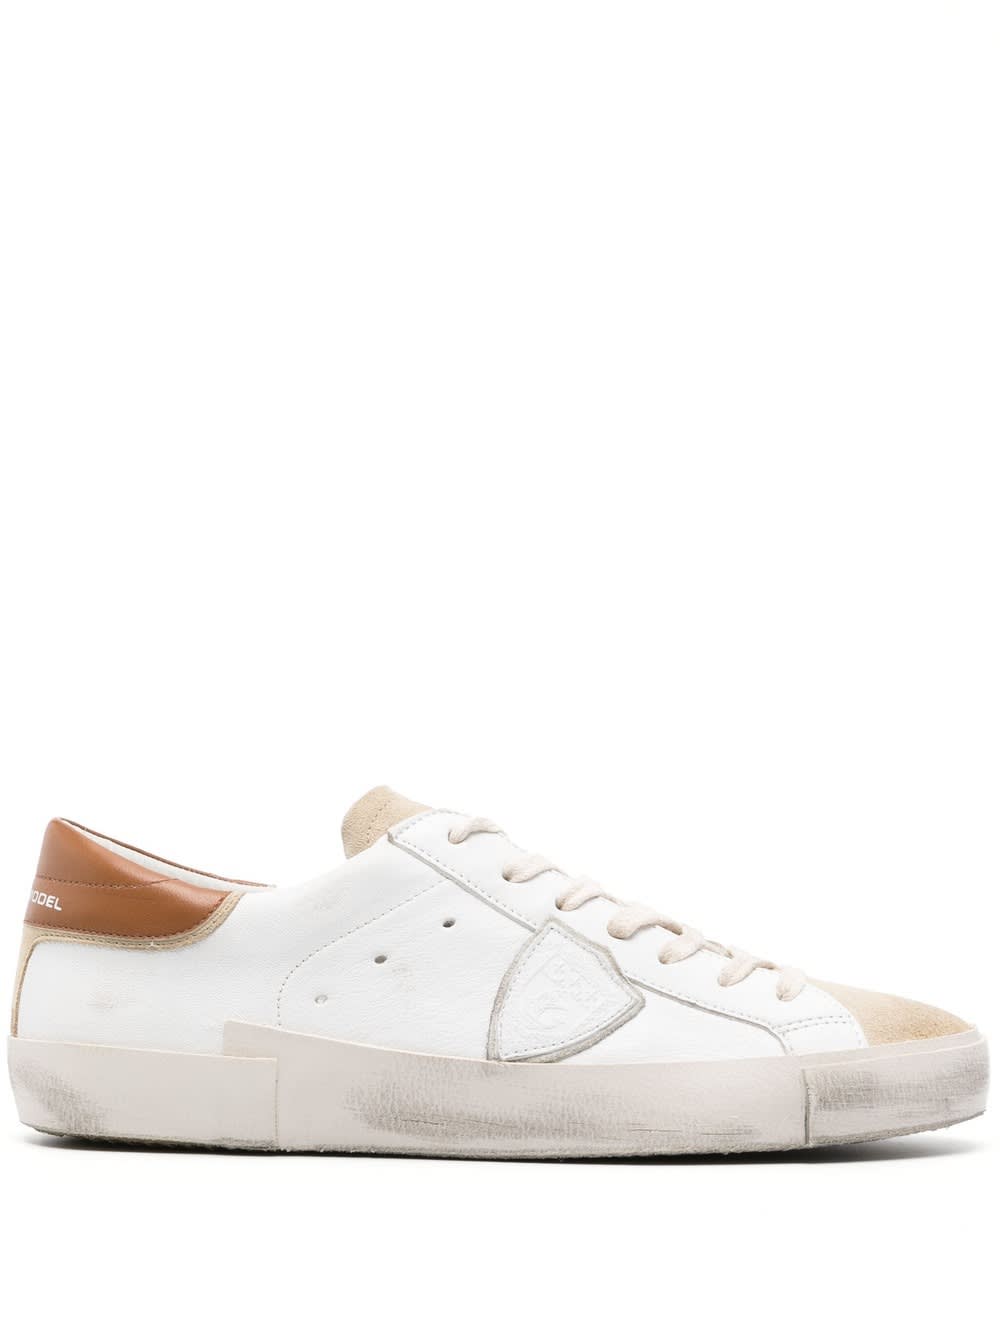 Prsx Low Sneakers - White And Brown